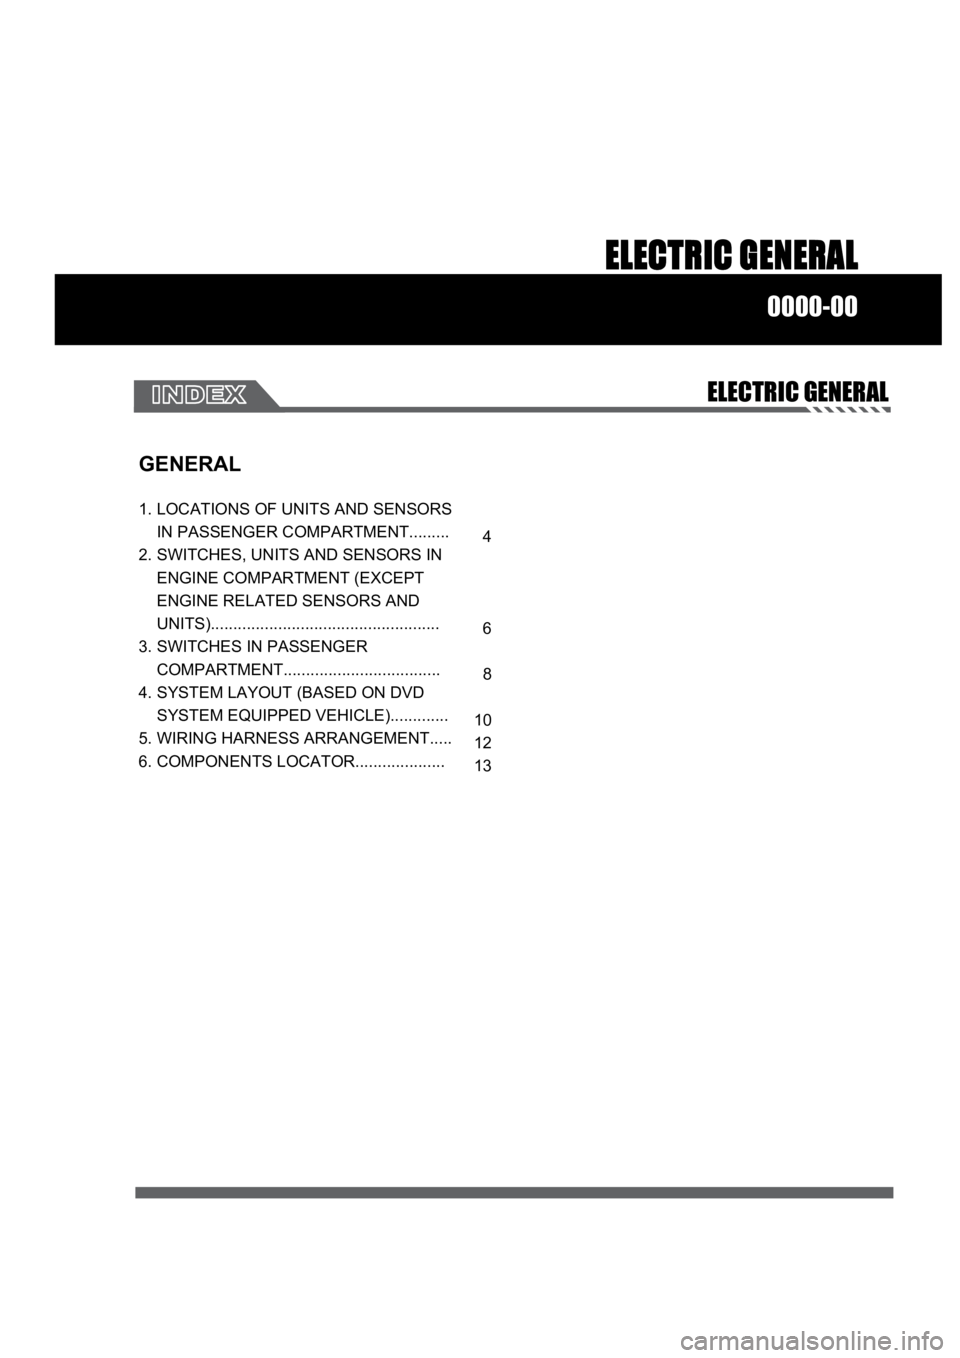 SSANGYONG RODIUS 2007  Service Manual ELECTRIC GENERAL
0000-00
ELECTRIC GENERAL
GENERAL 
1. LOCATIONS OF UNITS AND SENSORS 
    IN PASSENGER COMPARTMENT.........
2. SWITCHES, UNITS AND SENSORS IN 
    ENGINE COMPARTMENT (EXCEPT 
    ENGIN